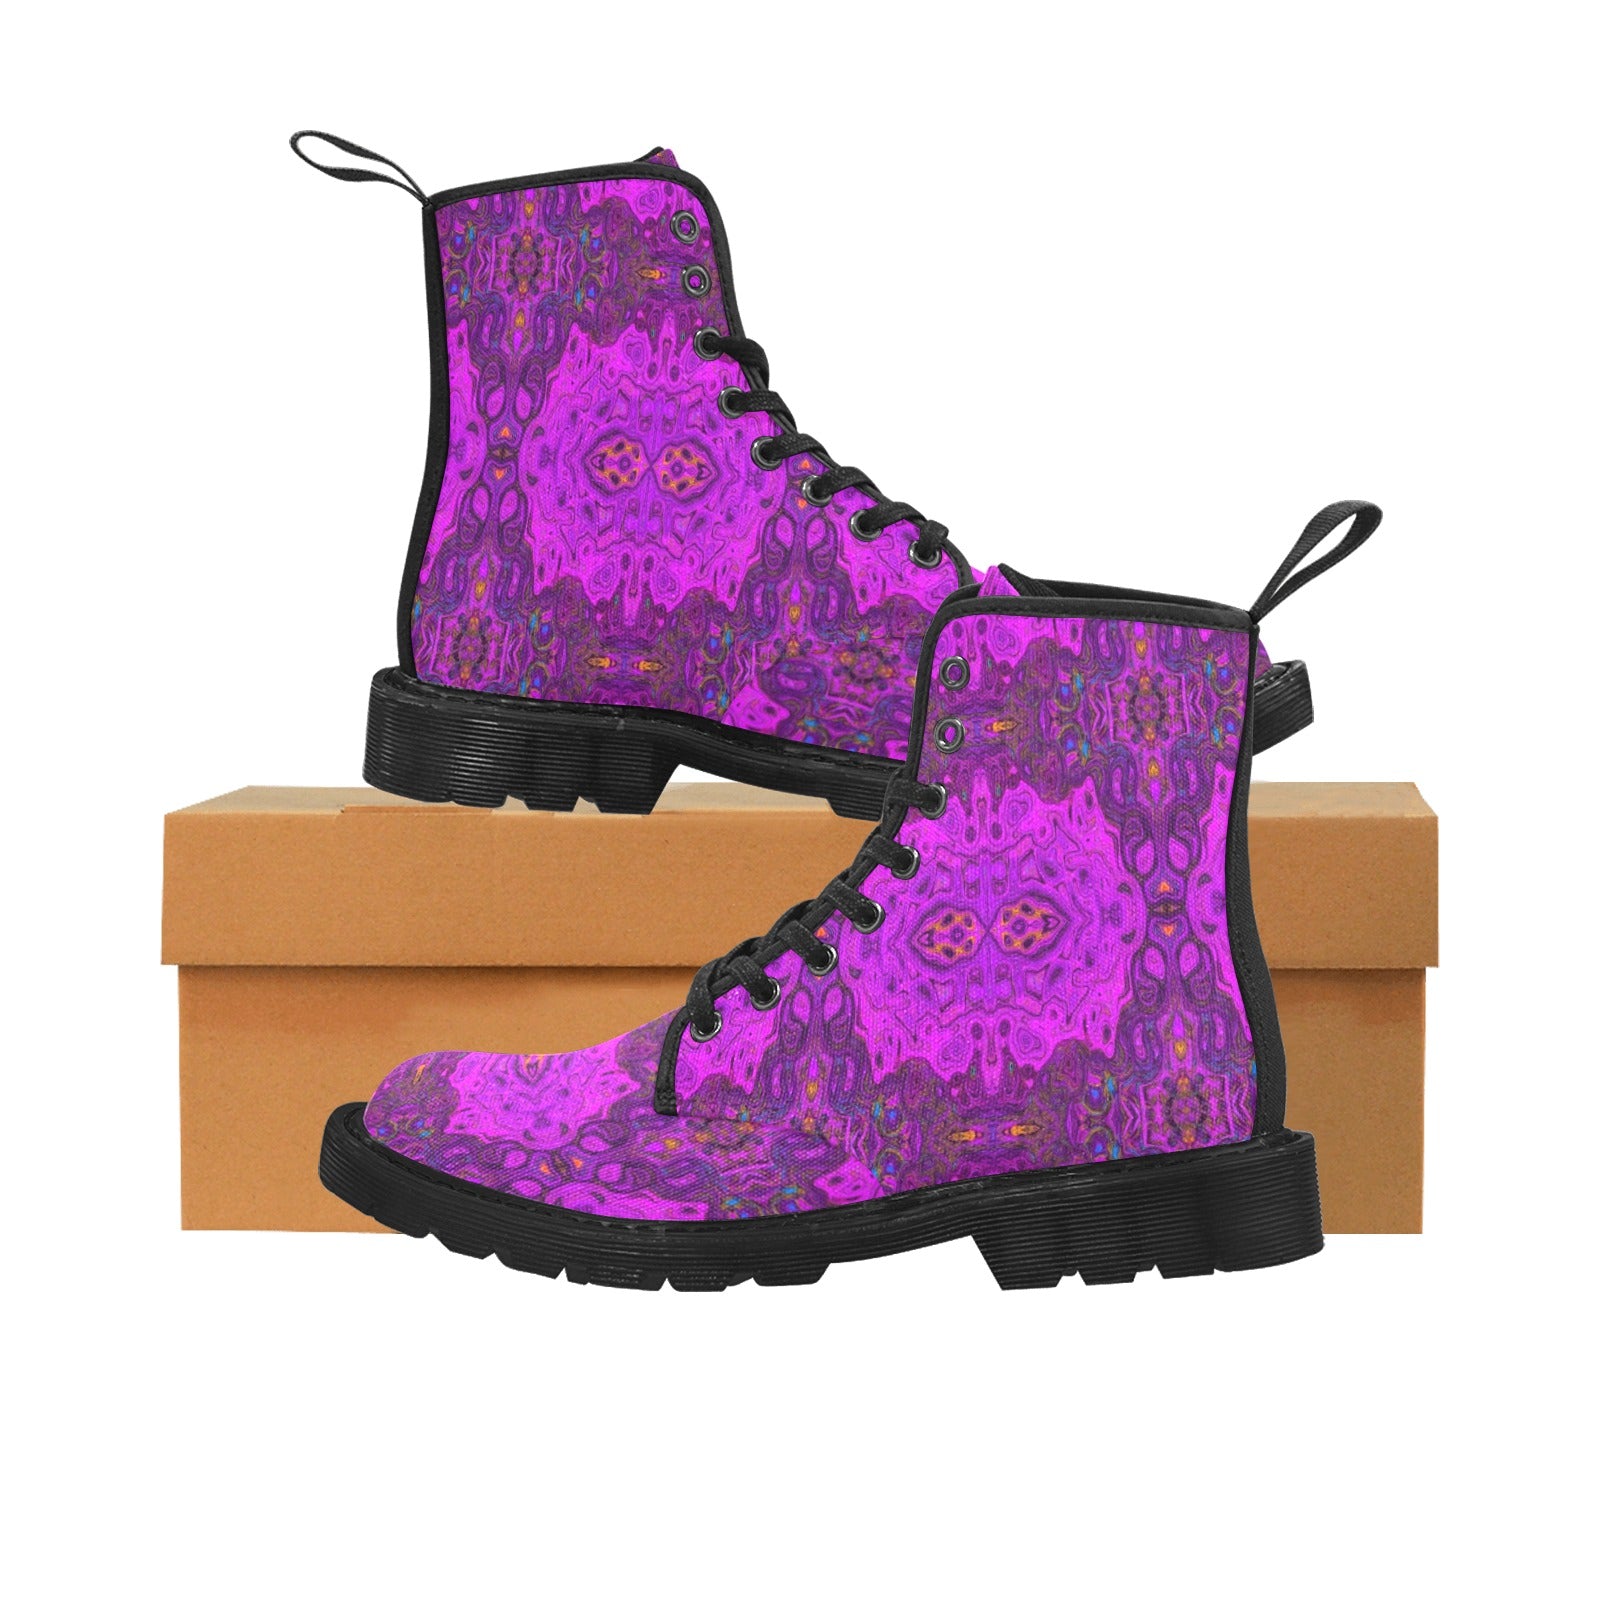 Boots for Women, Abstract Magenta and Black Groovy Pattern - Black